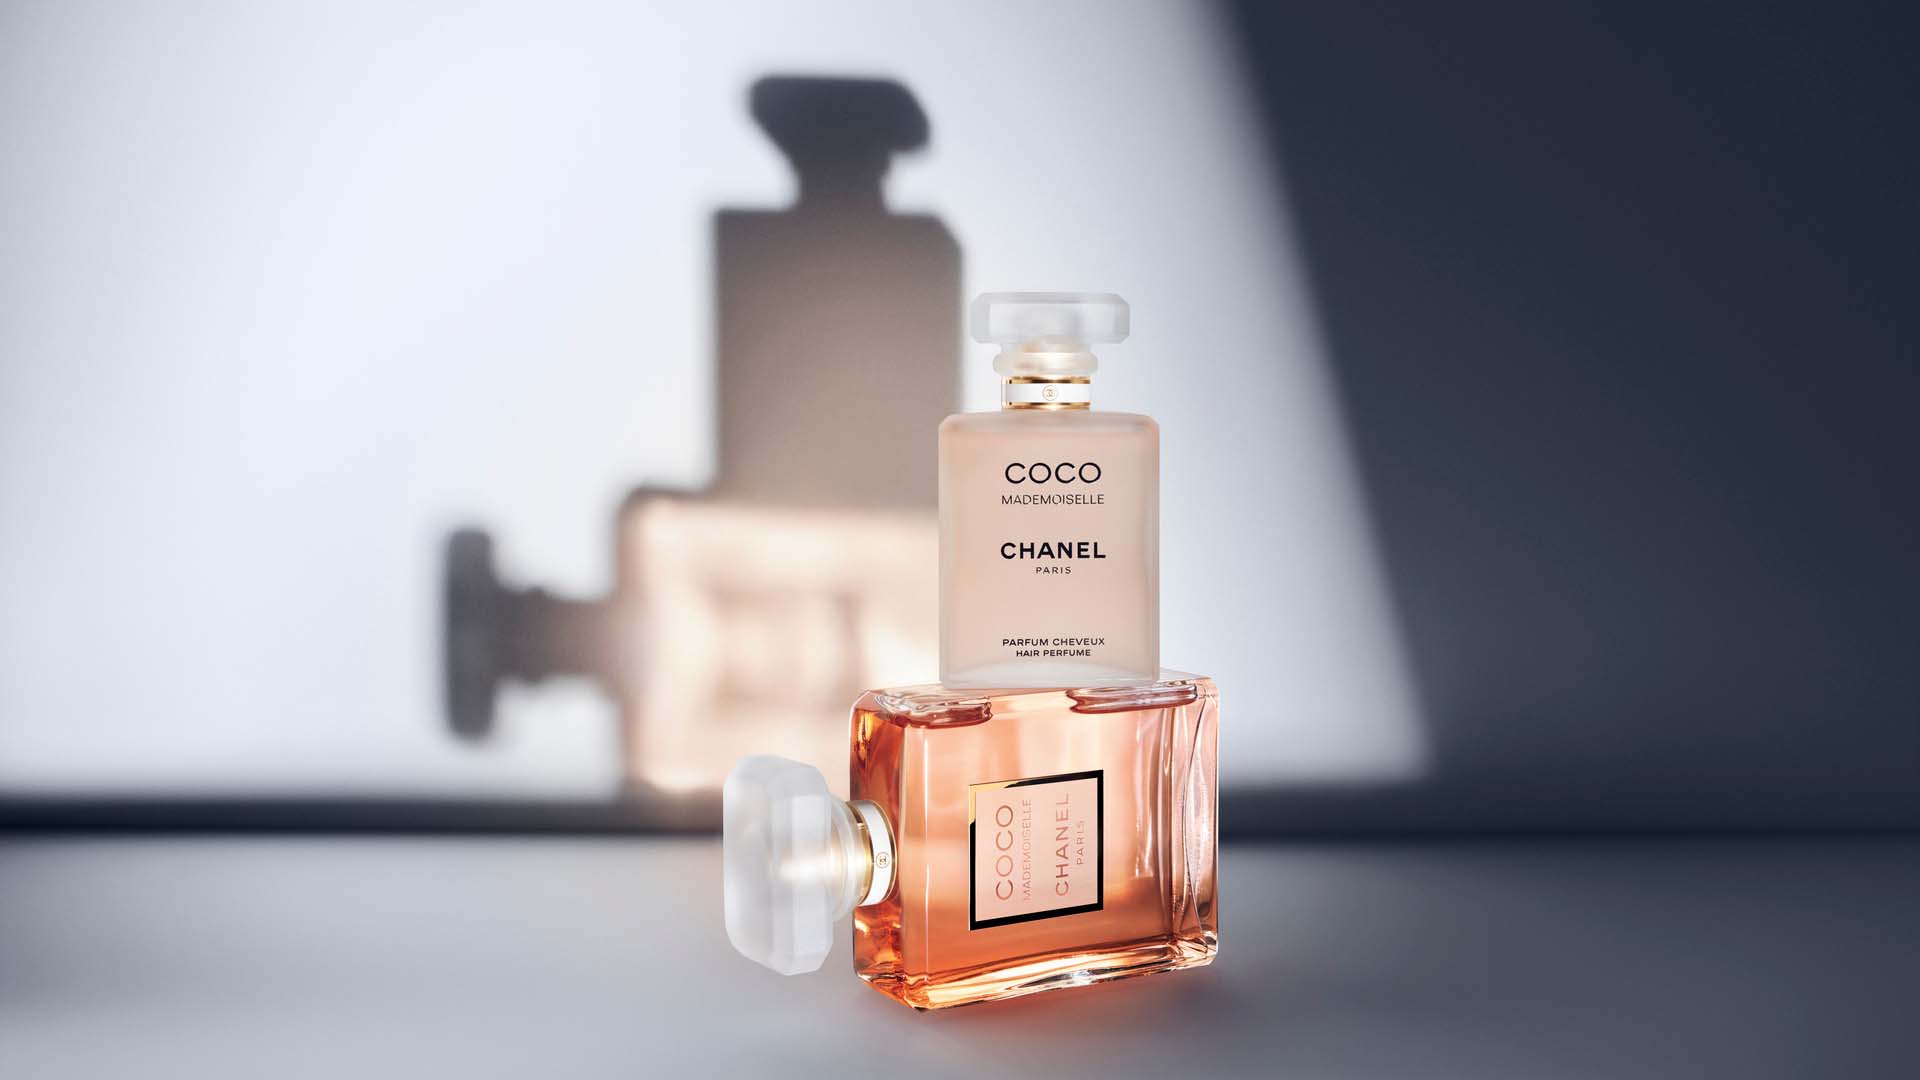 mademoiselle coco chanel perfume for women travel